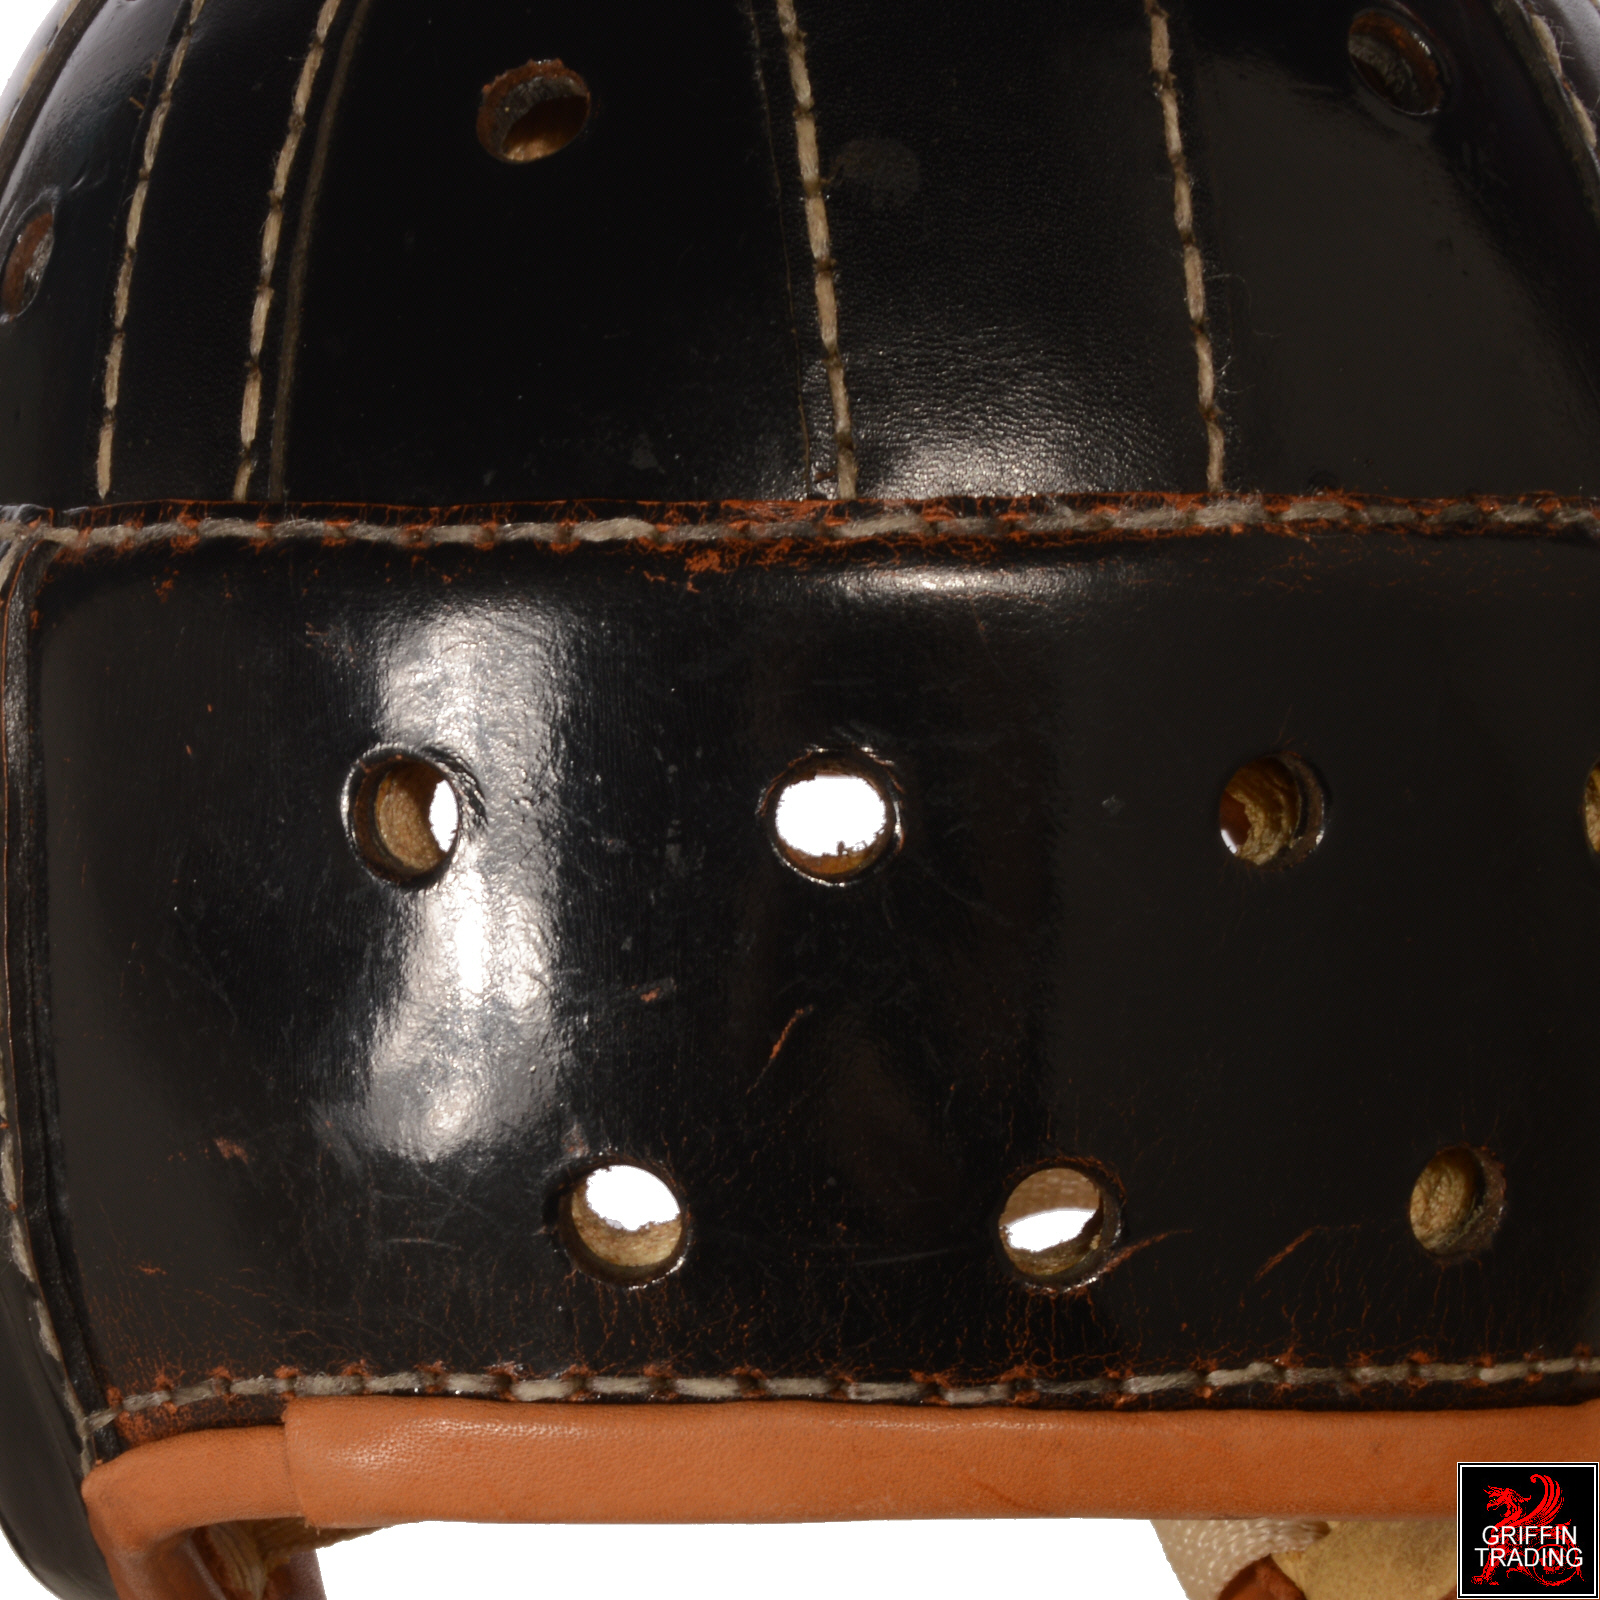 Vintage Leather Football HelmetCollector's Item & Memorabilia for Sports Fans 